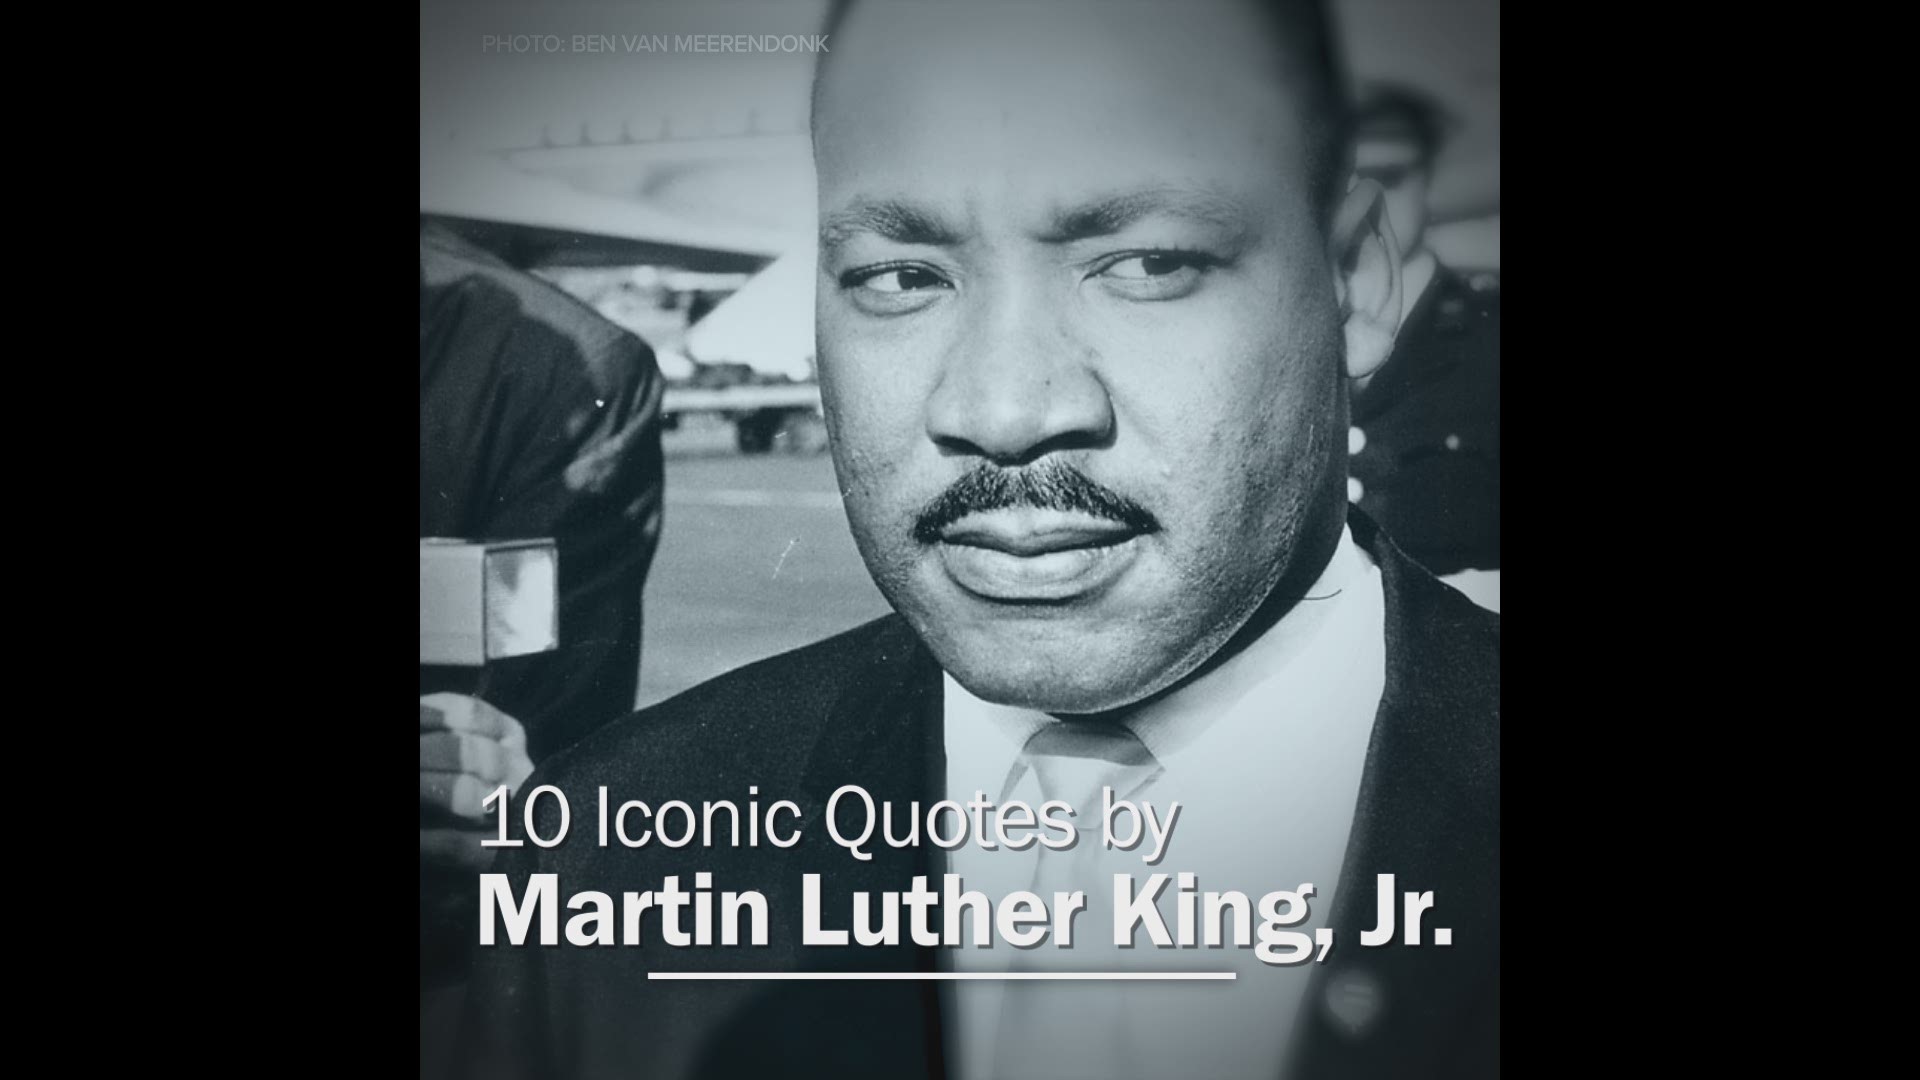 As we mark Martin Luther King Jr. Day, we remember his most iconic quotes.